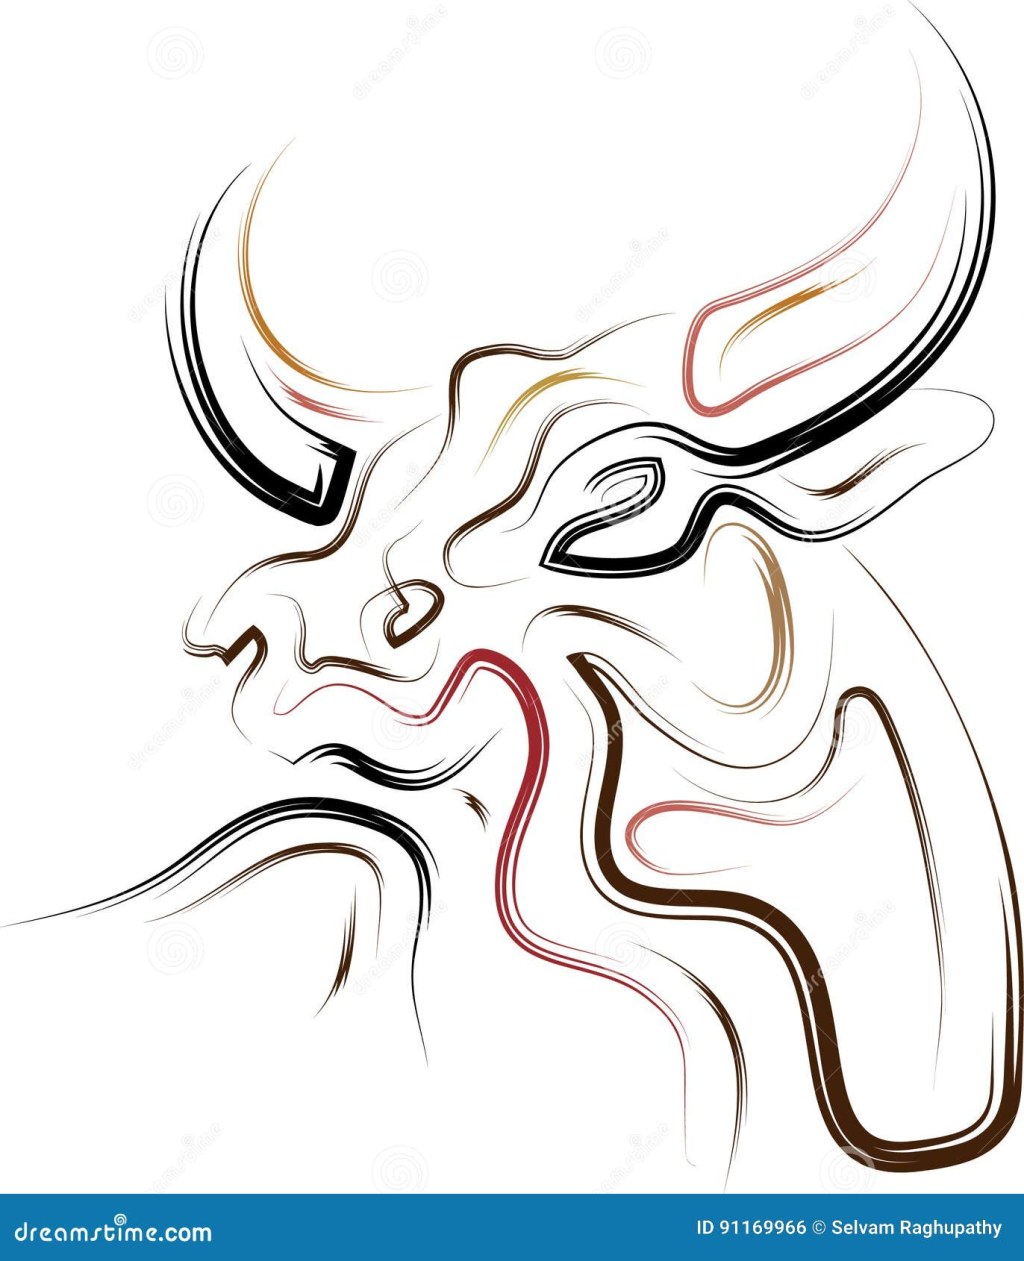 Picture of: Abstract Bull stock vector